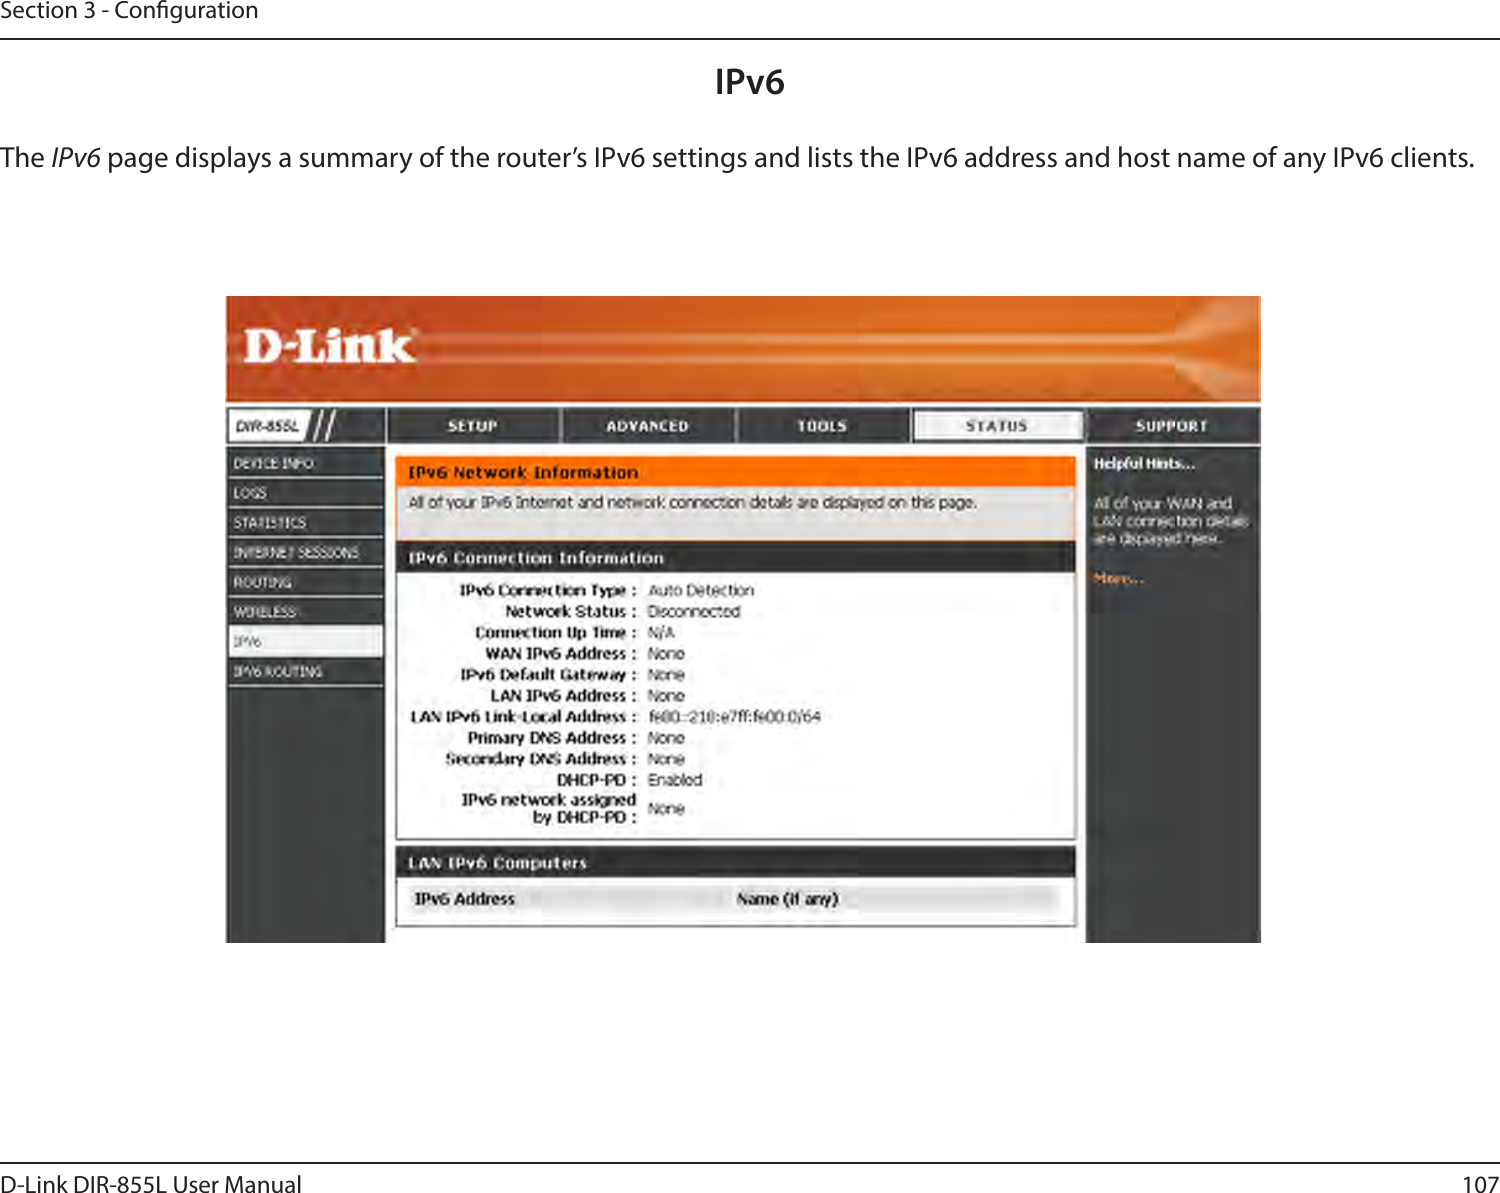 107D-Link DIR-855L User ManualSection 3 - CongurationIPv6The IPv6 page displays a summary of the router’s IPv6 settings and lists the IPv6 address and host name of any IPv6 clients. 